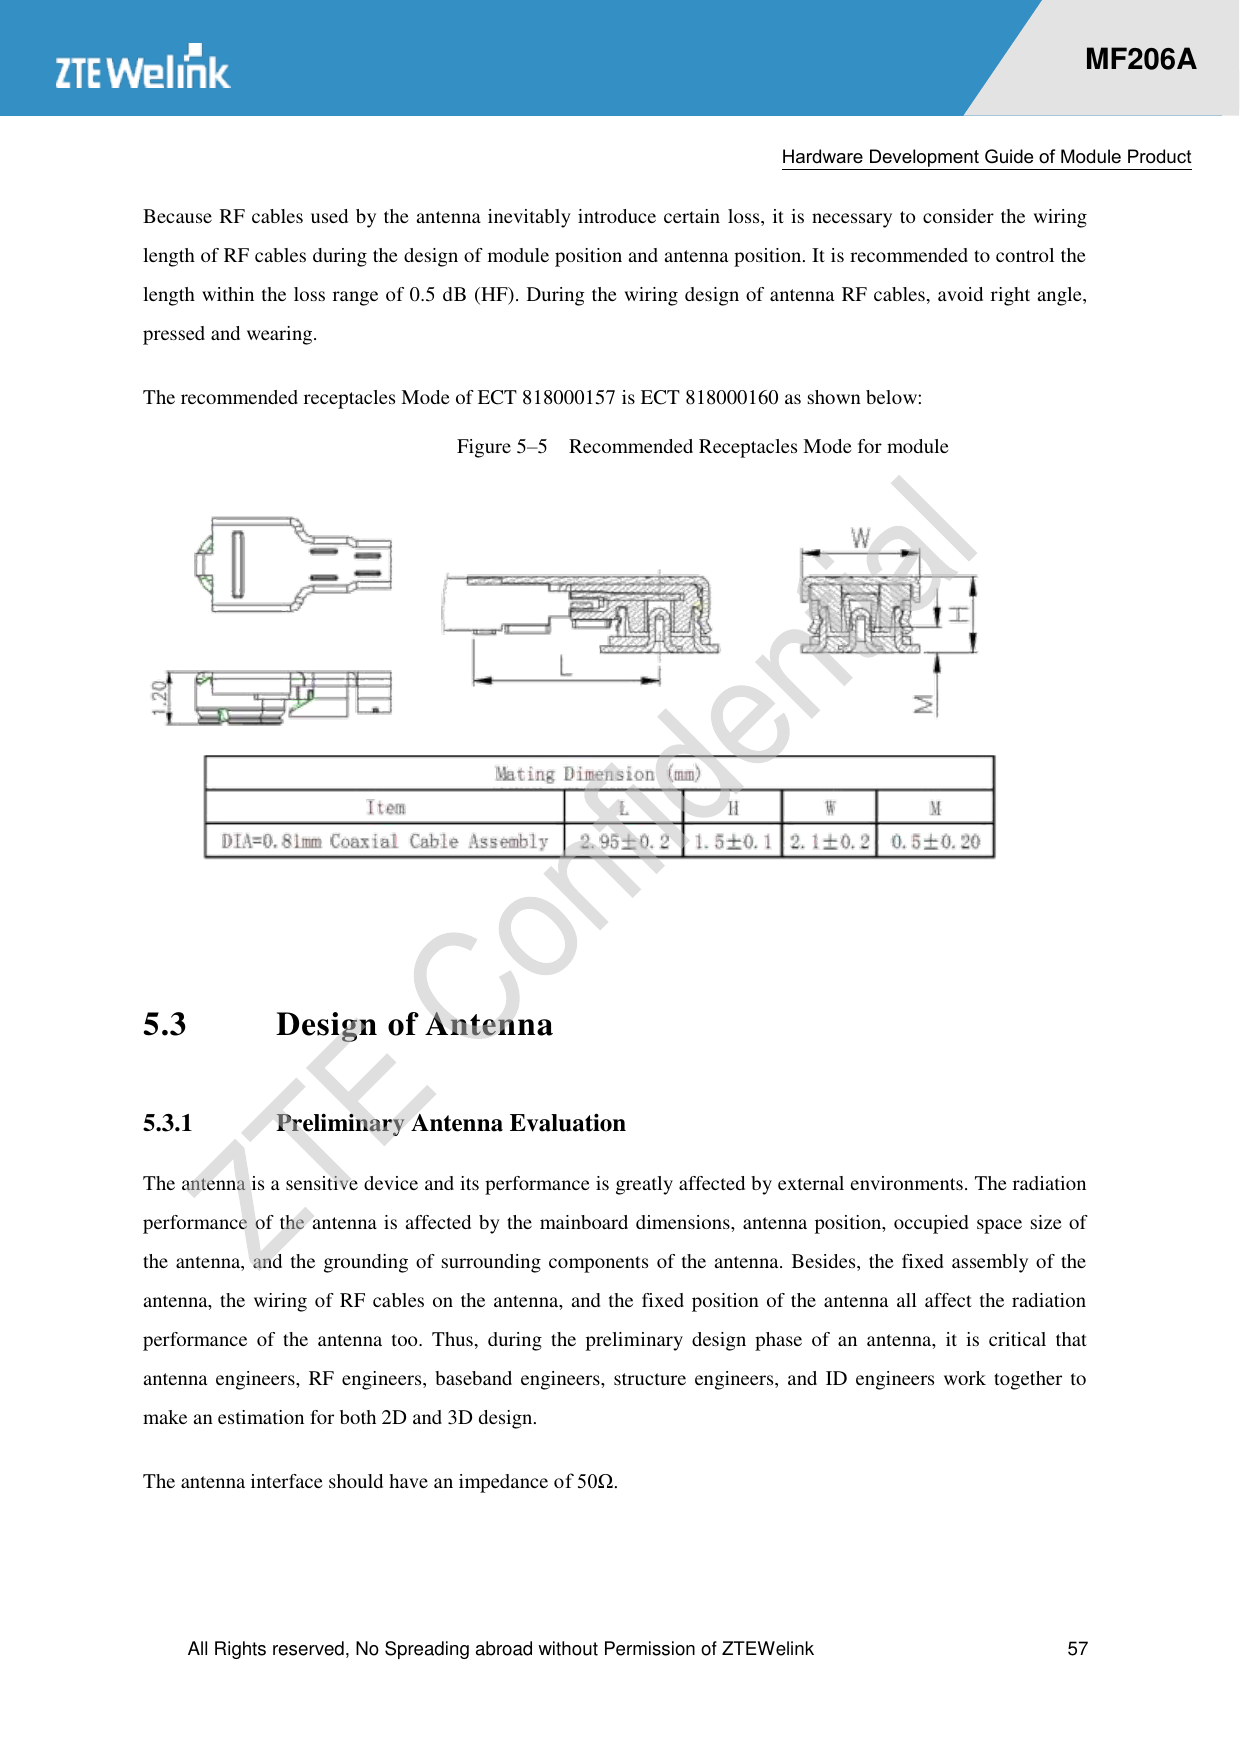  Hardware Development Guide of Module Product  All Rights reserved, No Spreading abroad without Permission of ZTEWelink  57    MF206A Because RF cables used by the antenna inevitably introduce certain loss, it is necessary to consider the wiring length of RF cables during the design of module position and antenna position. It is recommended to control the length within the loss range of 0.5 dB (HF). During the wiring design of antenna RF cables, avoid right angle, pressed and wearing.   The recommended receptacles Mode of ECT 818000157 is ECT 818000160 as shown below: Figure 5–5  Recommended Receptacles Mode for module   5.3 Design of Antenna 5.3.1 Preliminary Antenna Evaluation The antenna is a sensitive device and its performance is greatly affected by external environments. The radiation performance of the antenna is affected by the mainboard dimensions, antenna position, occupied space size of the antenna, and the grounding of surrounding components of the antenna. Besides, the fixed assembly of the antenna, the wiring of RF cables on the antenna, and the fixed position of the antenna all affect the radiation performance  of  the  antenna  too.  Thus,  during  the  preliminary  design  phase  of  an  antenna,  it  is  critical  that antenna engineers, RF  engineers, baseband  engineers, structure engineers, and ID engineers work together  to make an estimation for both 2D and 3D design. The antenna interface should have an impedance of 50Ω.  